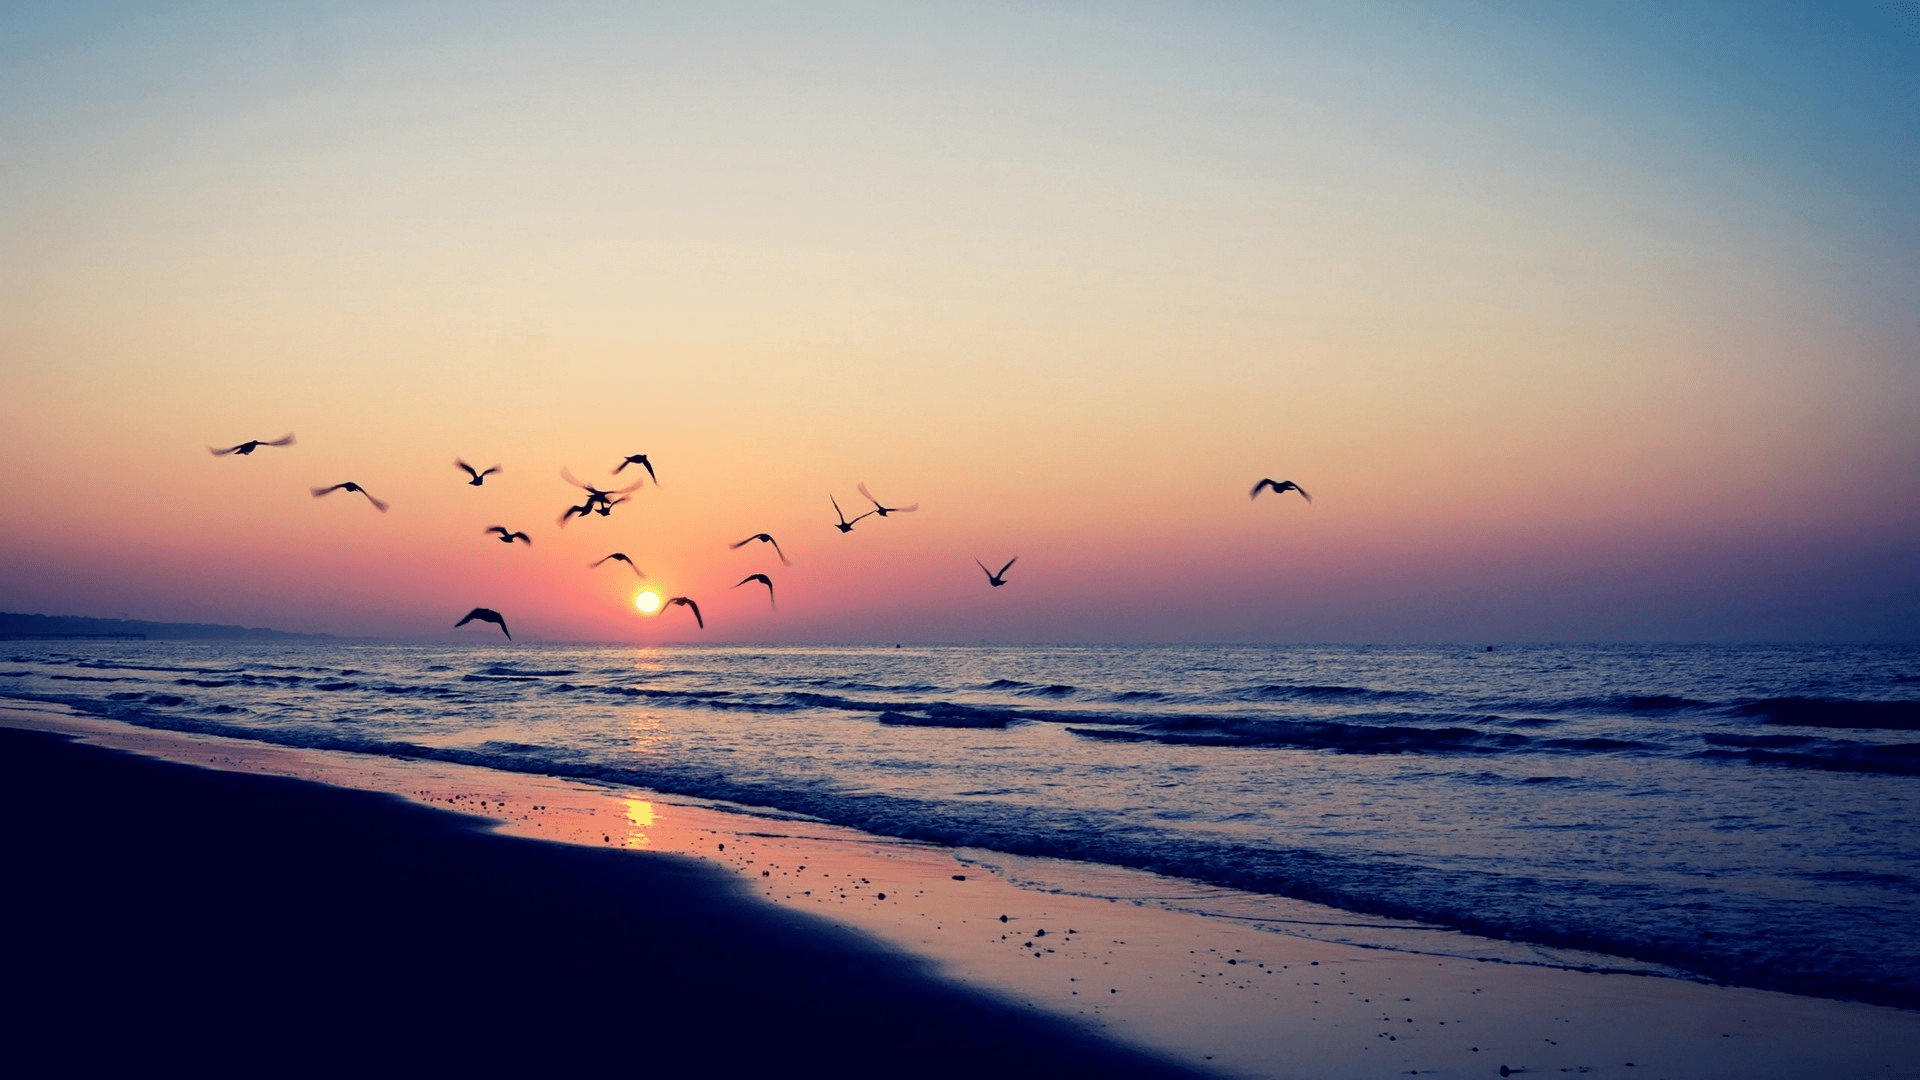 Sunset HD Aesthetic Wallpapers